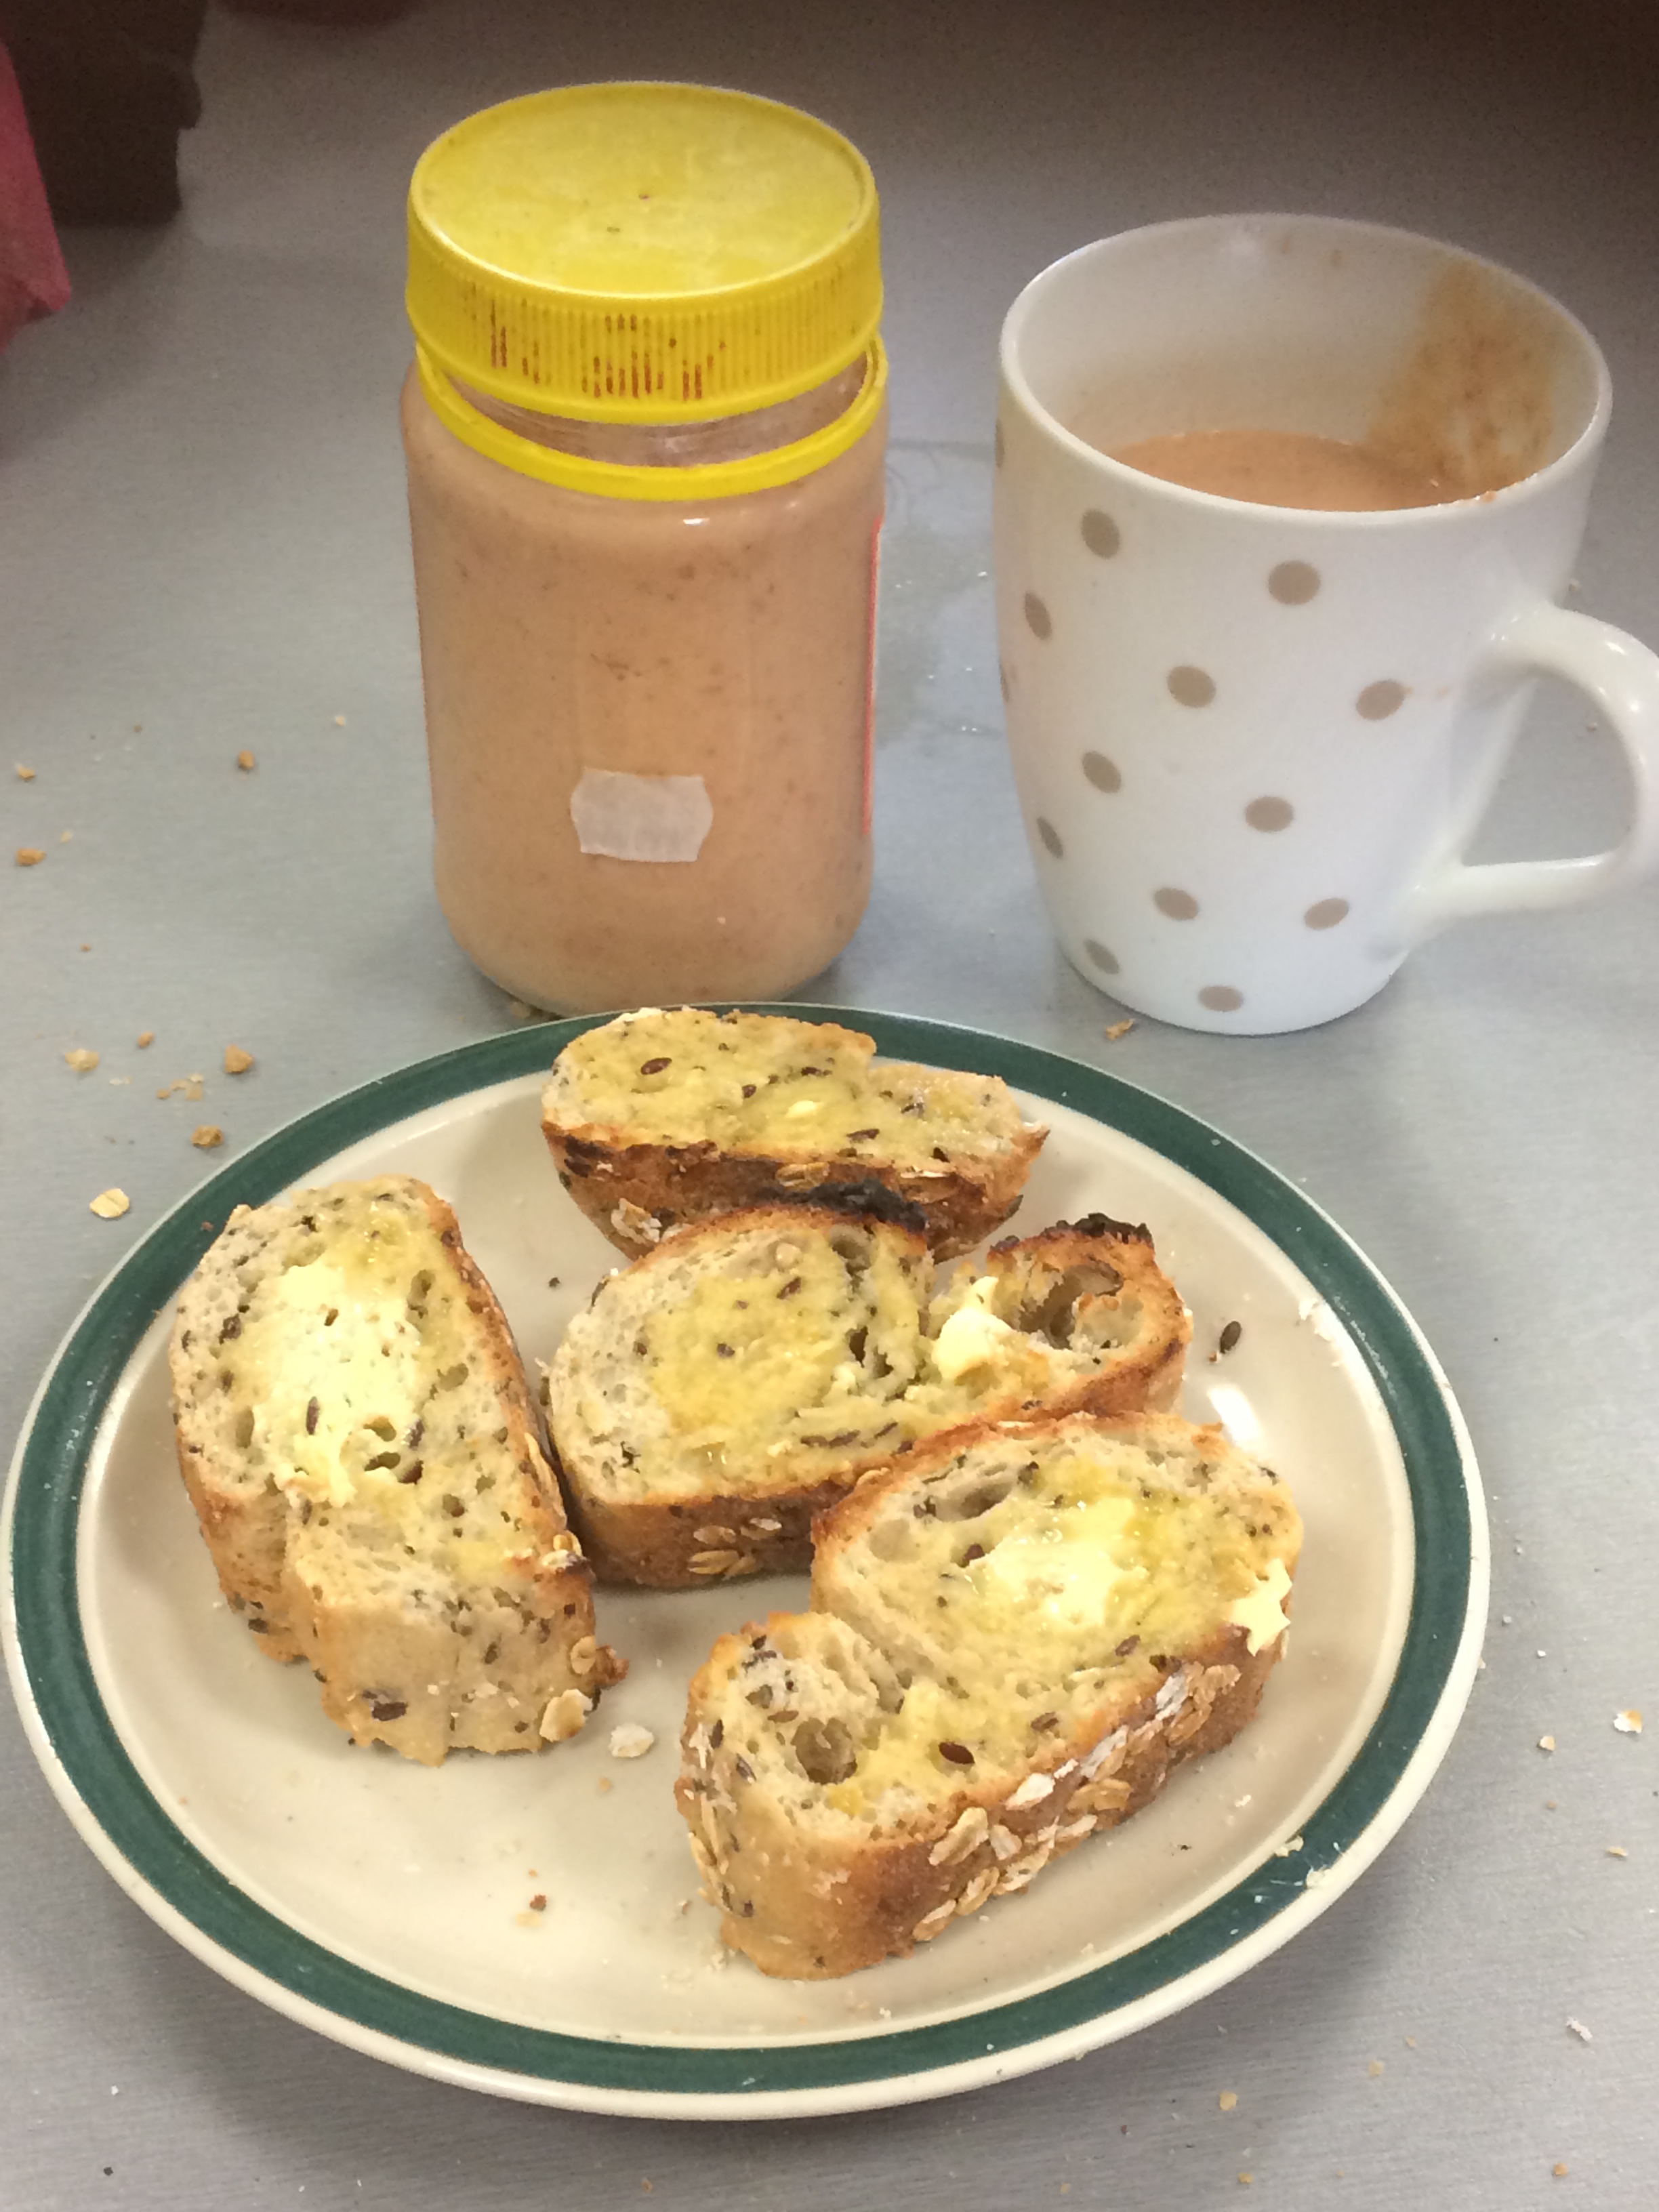 Four small slices of margarined wholegrain toast on a plate. Behind them is a glass jar full of smoothie (smoothie is light pink, jar lid is yellow) and a mug (white with brown polka dots) full of the same.